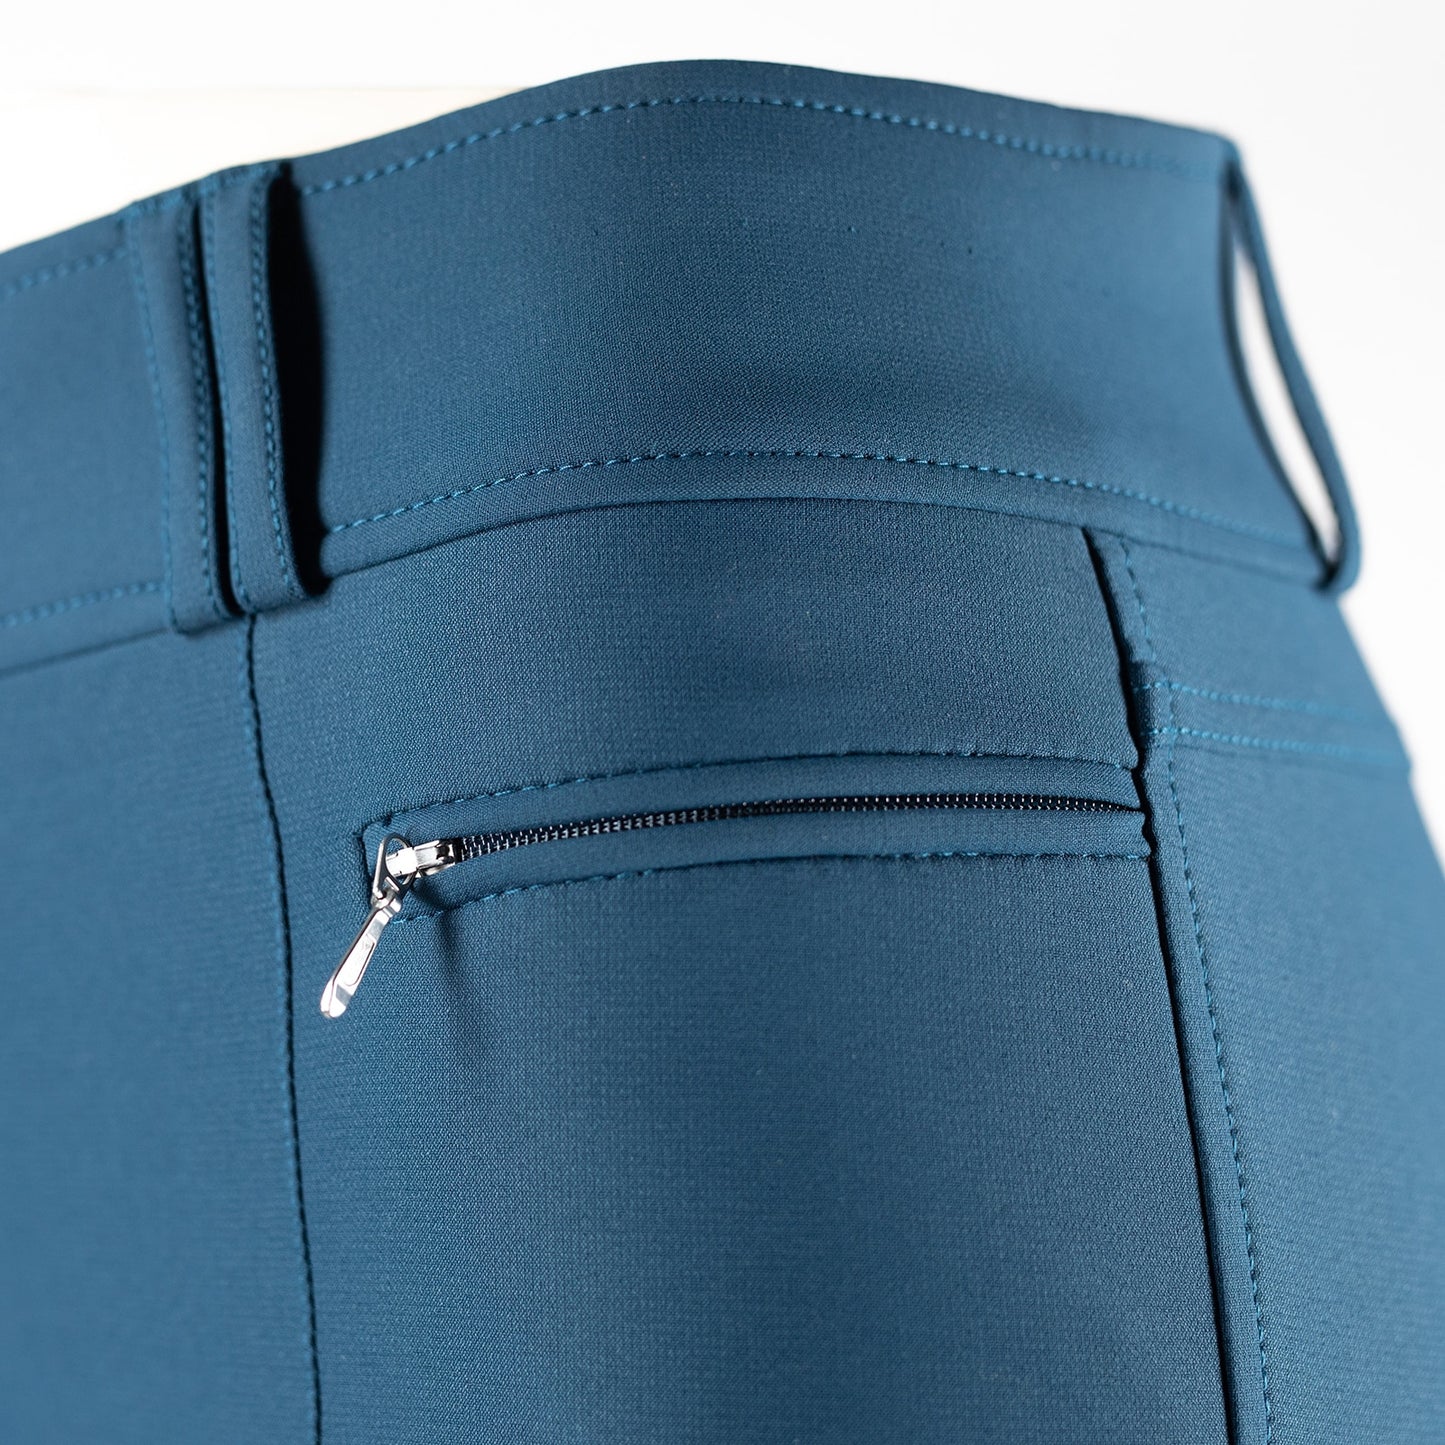 Angelina Full Seat Breeches || Reflecting Pond Blue || CLOSE OUT